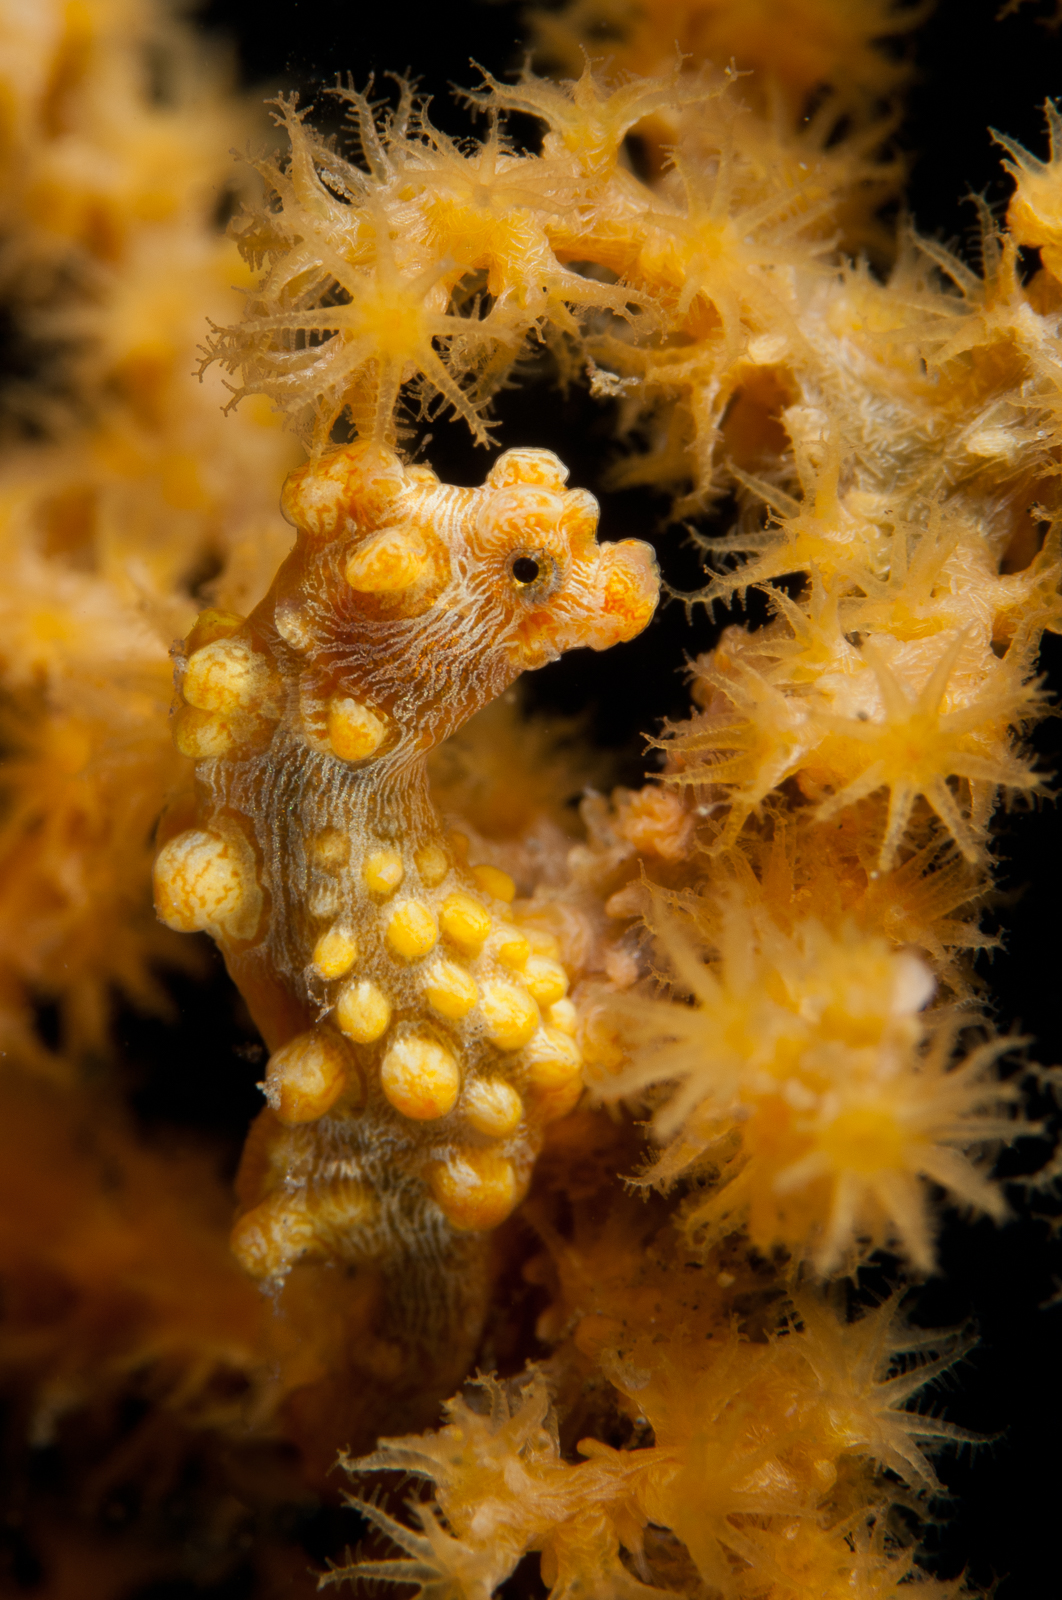 Where Do Baby Seahorses Come From? - Science Friday